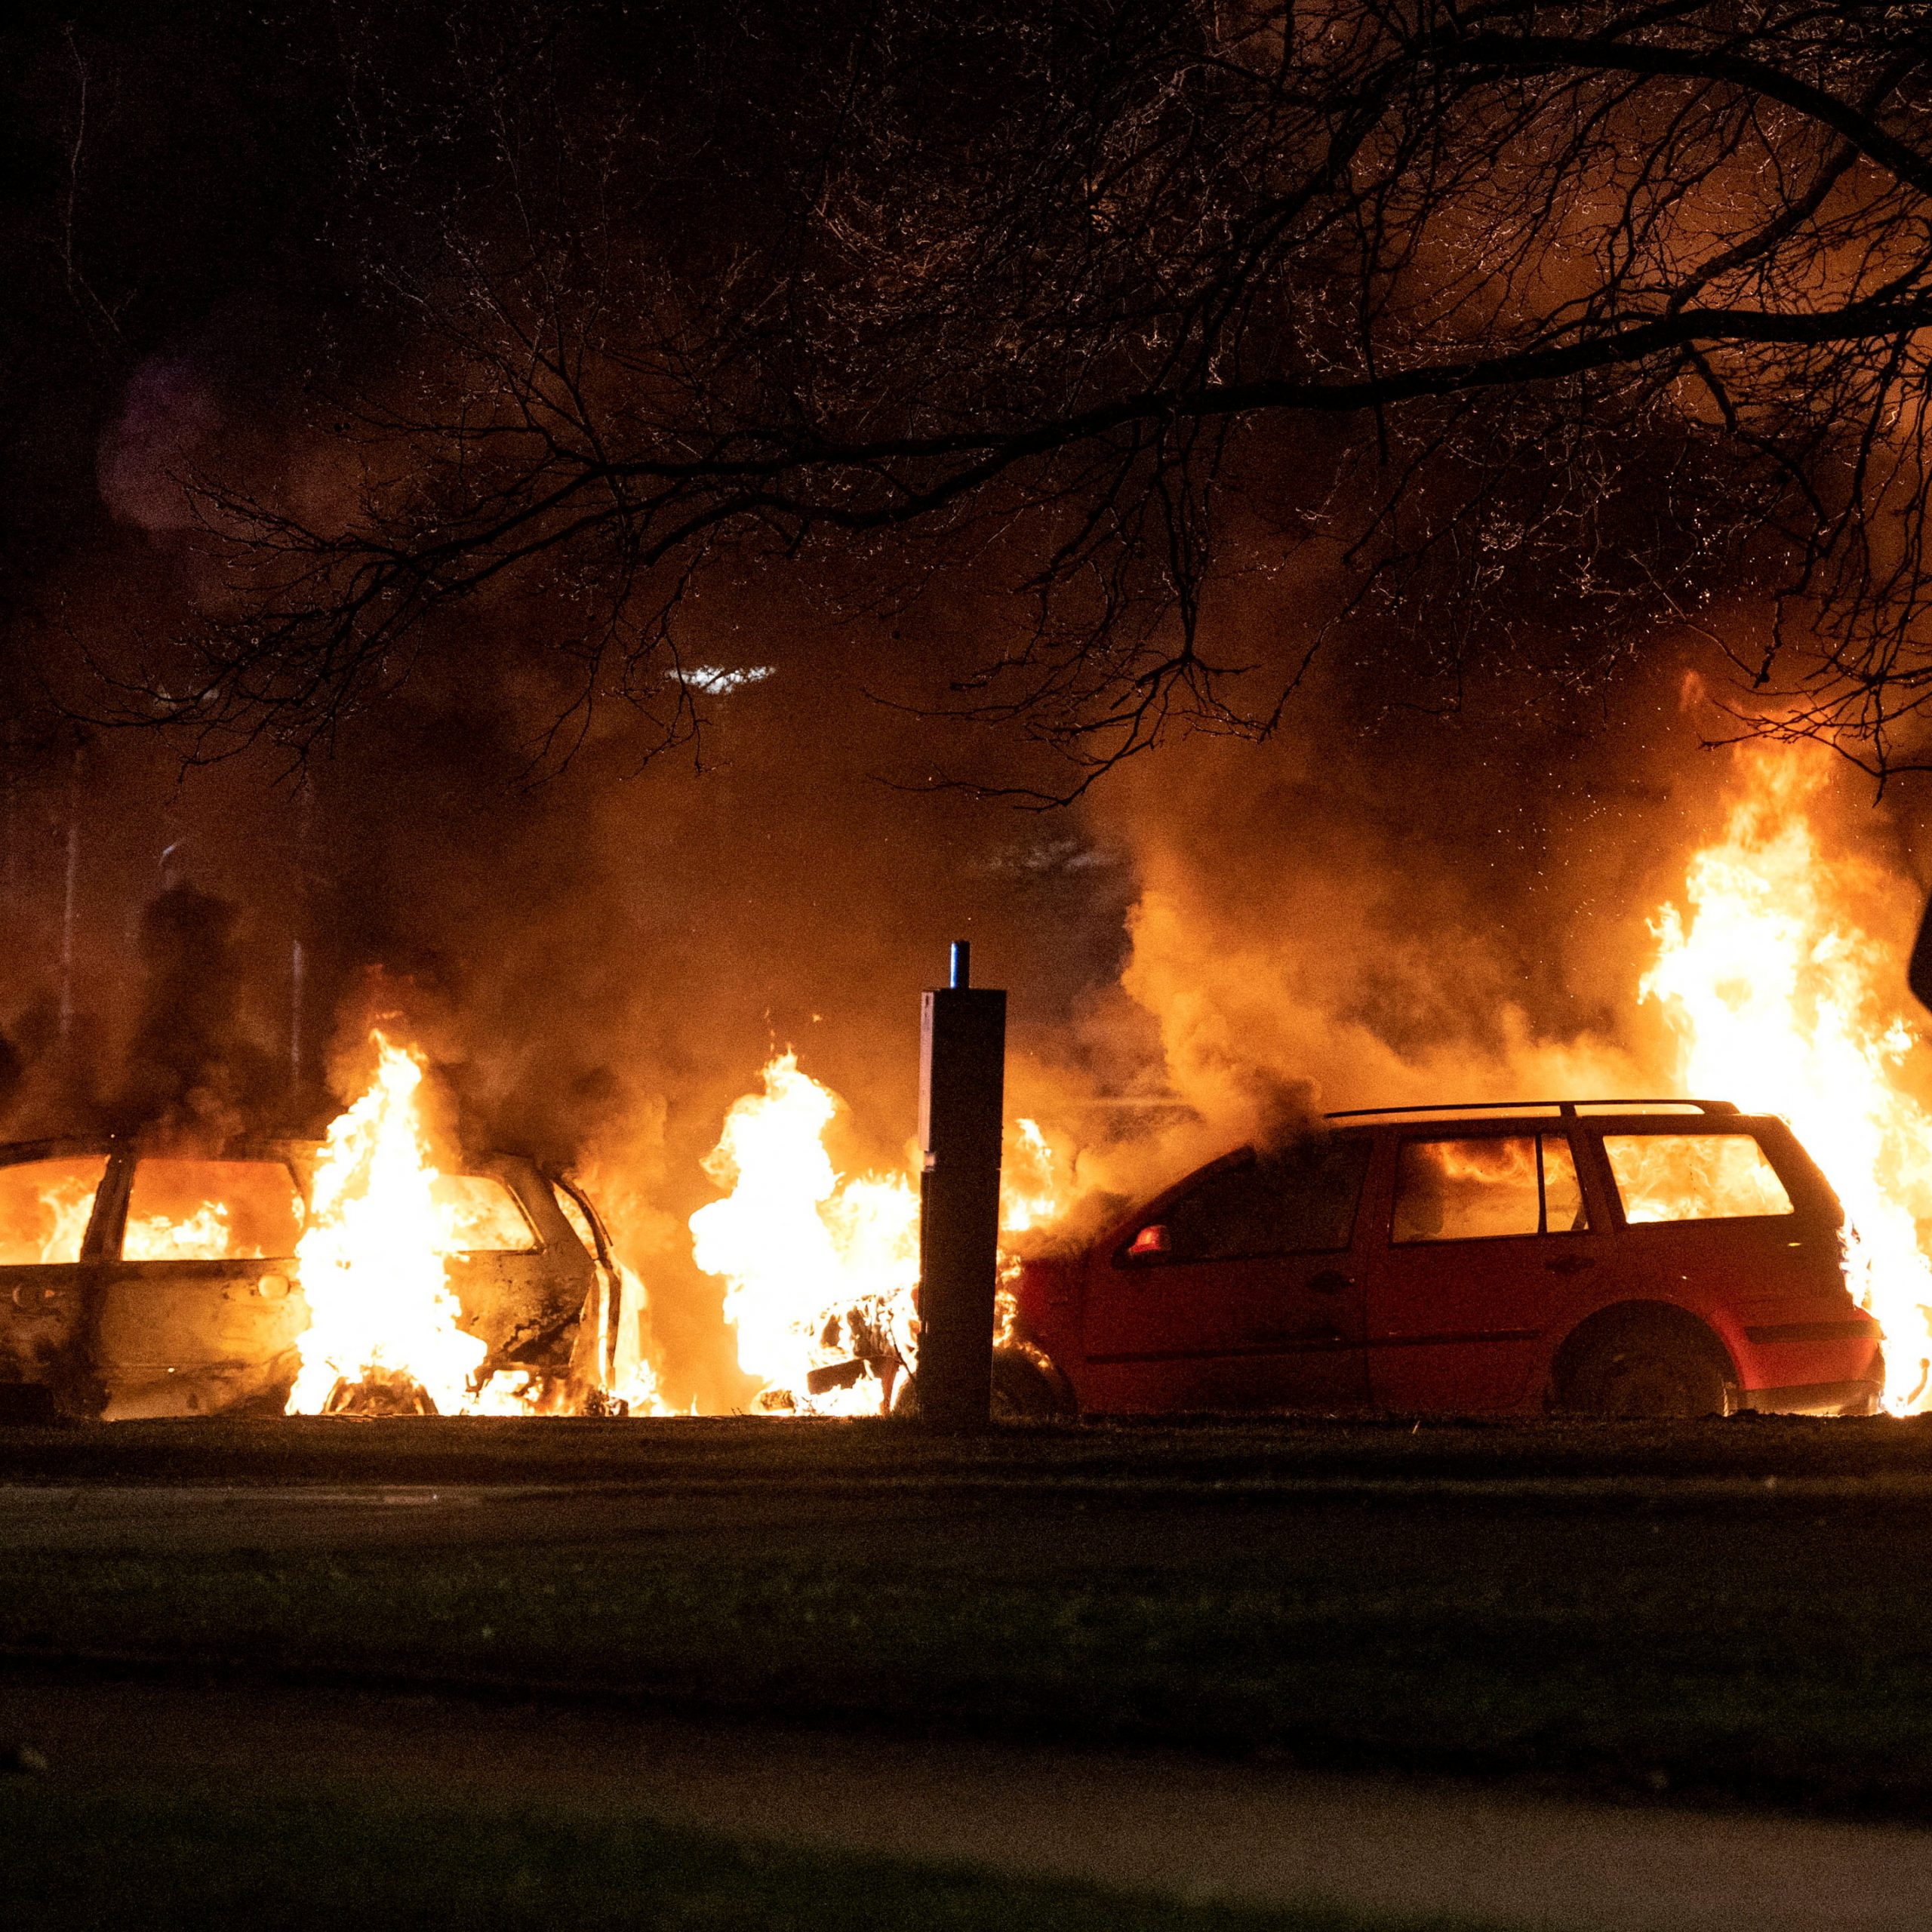 Cars are seen set on fire in Rosengard district, following Quran burnings that caused riots in several Swedish towns over the Easter weekend, in Malmo, Sweden April 17, 2022. Picture taken April 17, 2022. Johan Nilsson/TT News Agency/via REUTERS ATTENTION EDITORS - THIS IMAGE WAS PROVIDED BY A THIRD PARTY. SWEDEN OUT. NO COMMERCIAL OR EDITORIAL SALES IN SWEDEN.